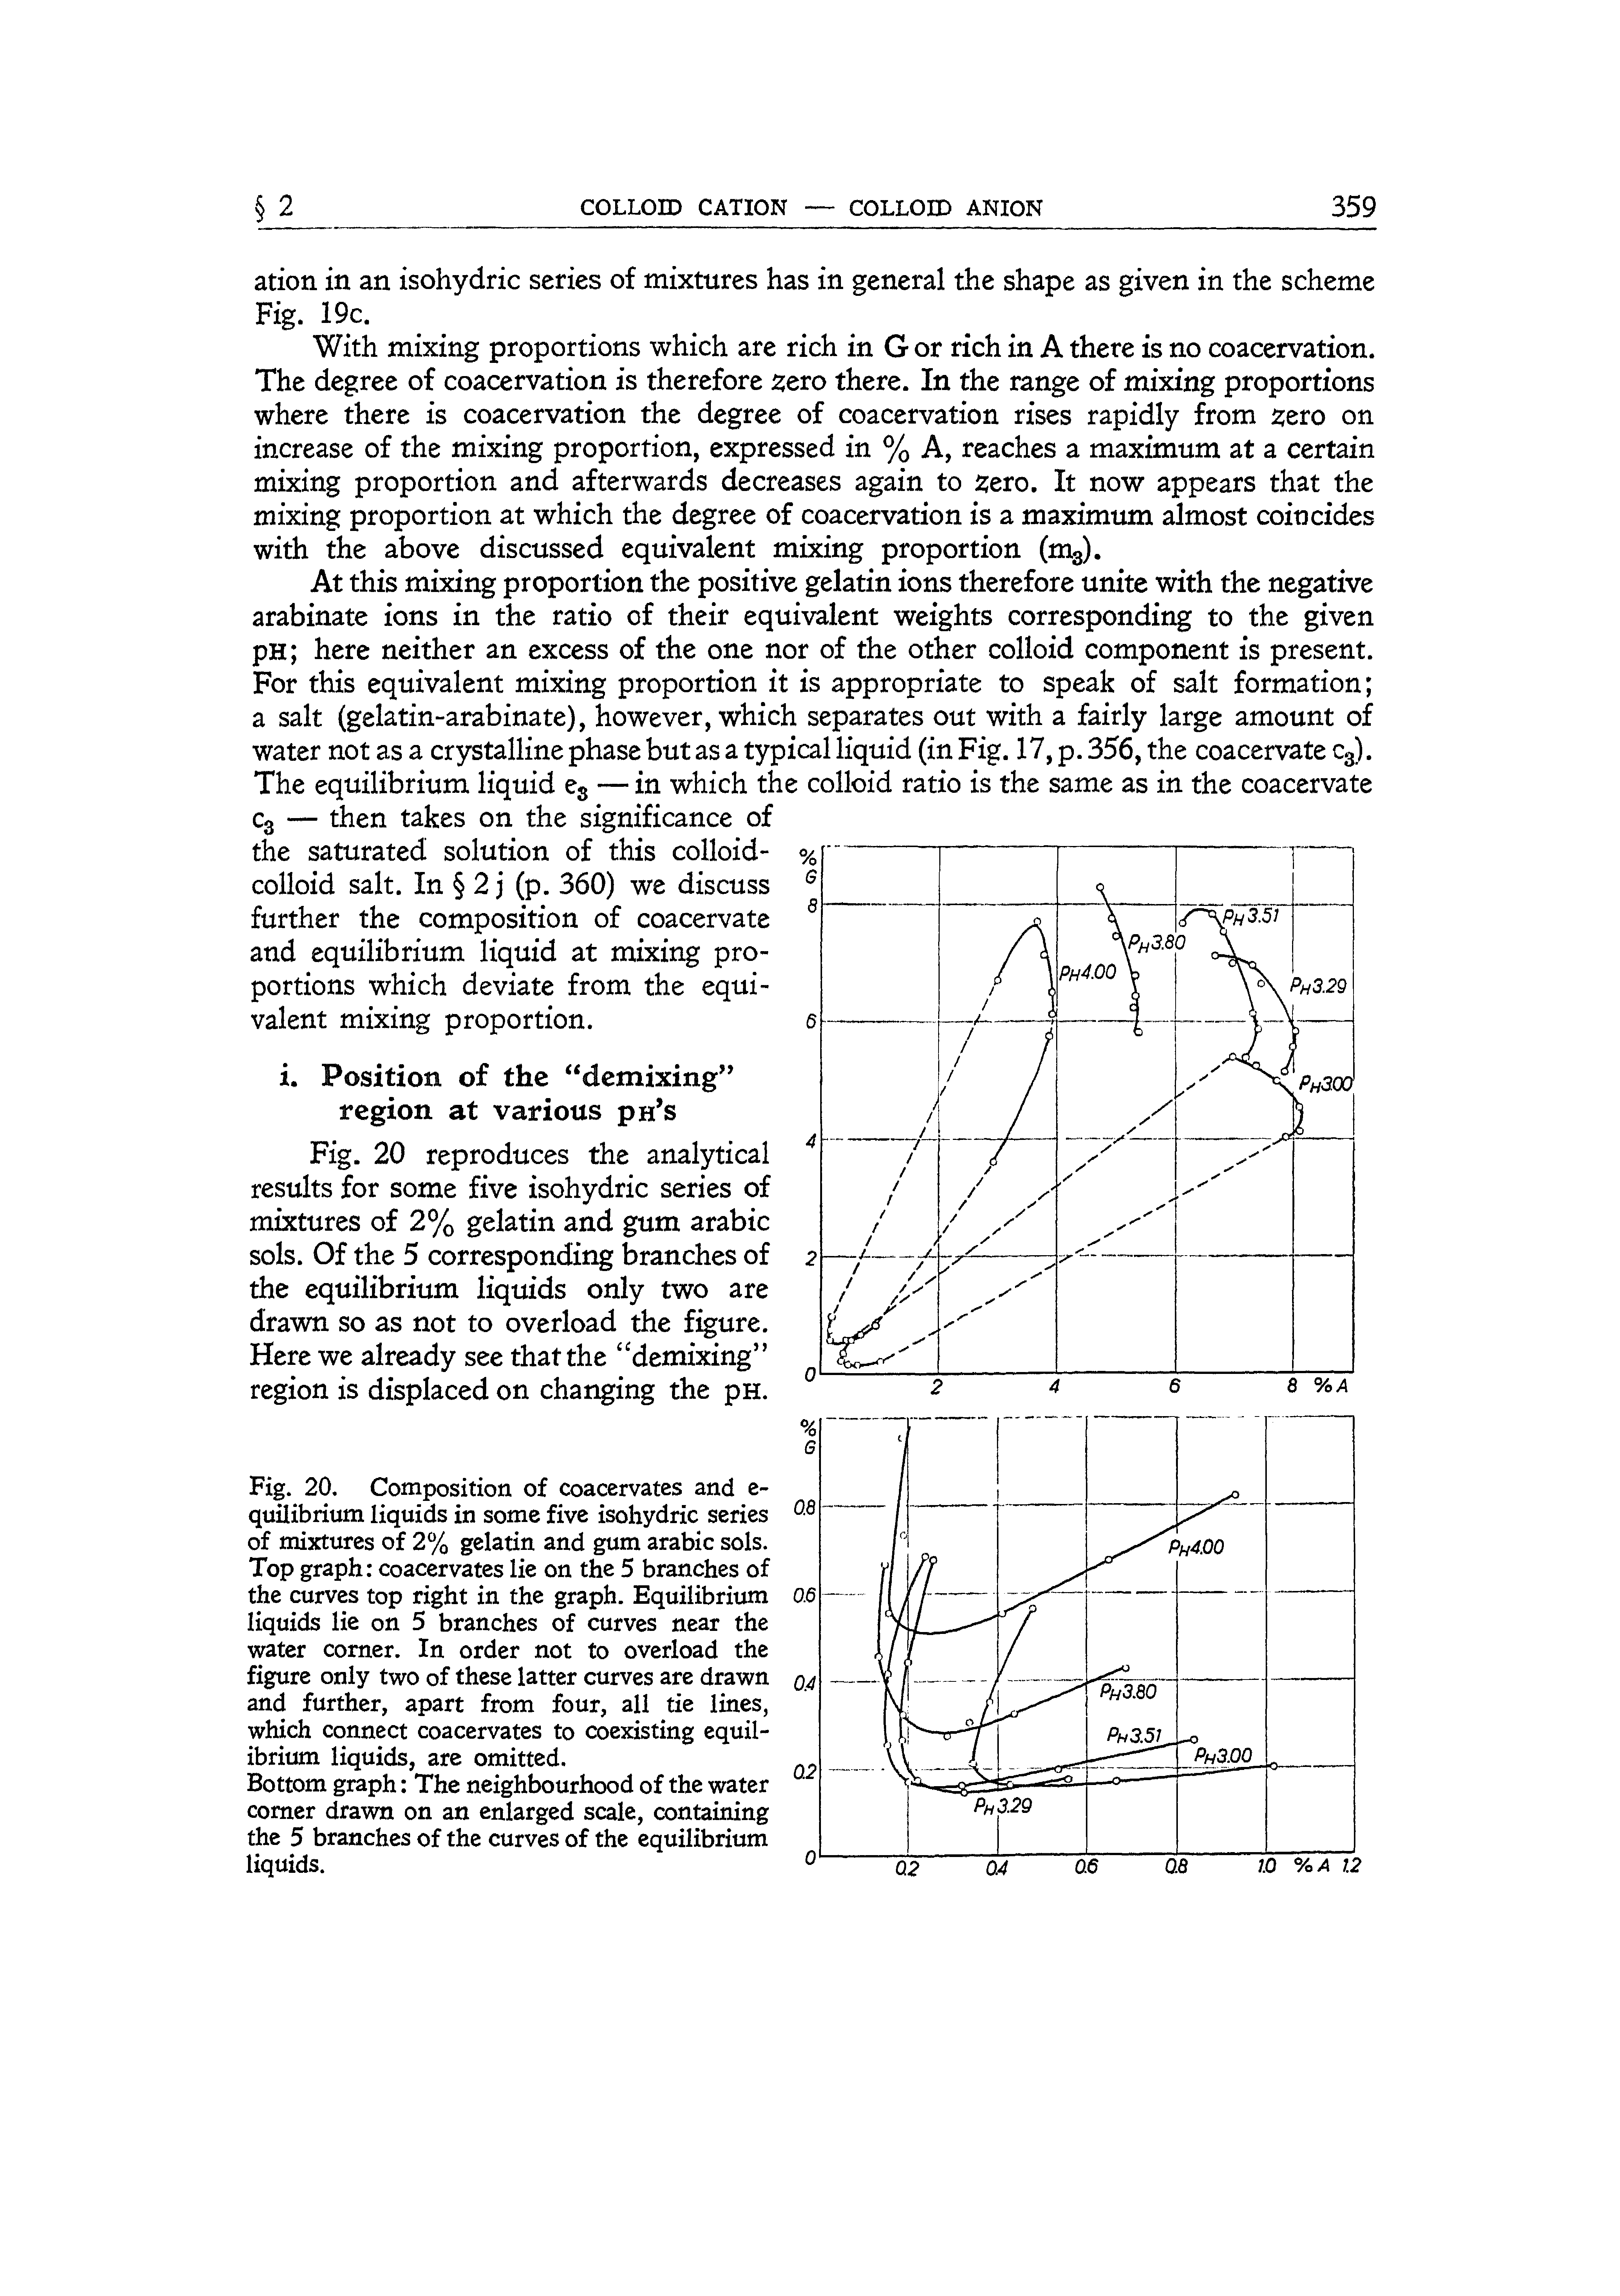 Fig. 20. Composition of coacervates and c-quilibrium liquids in some five isohydric series of mixtures of 2% gelatin and gum arabic sols. Top graph coacervates lie on the 5 branches of the curves top right in the graph. Equilibrium liquids lie on 5 branches of curves near the water comer. In order not to overload the figure only two of these latter curves arc drawn and further, apart from four, all tie lines, which connect coacervates to coexisting equilibrium liquids, are omitted.